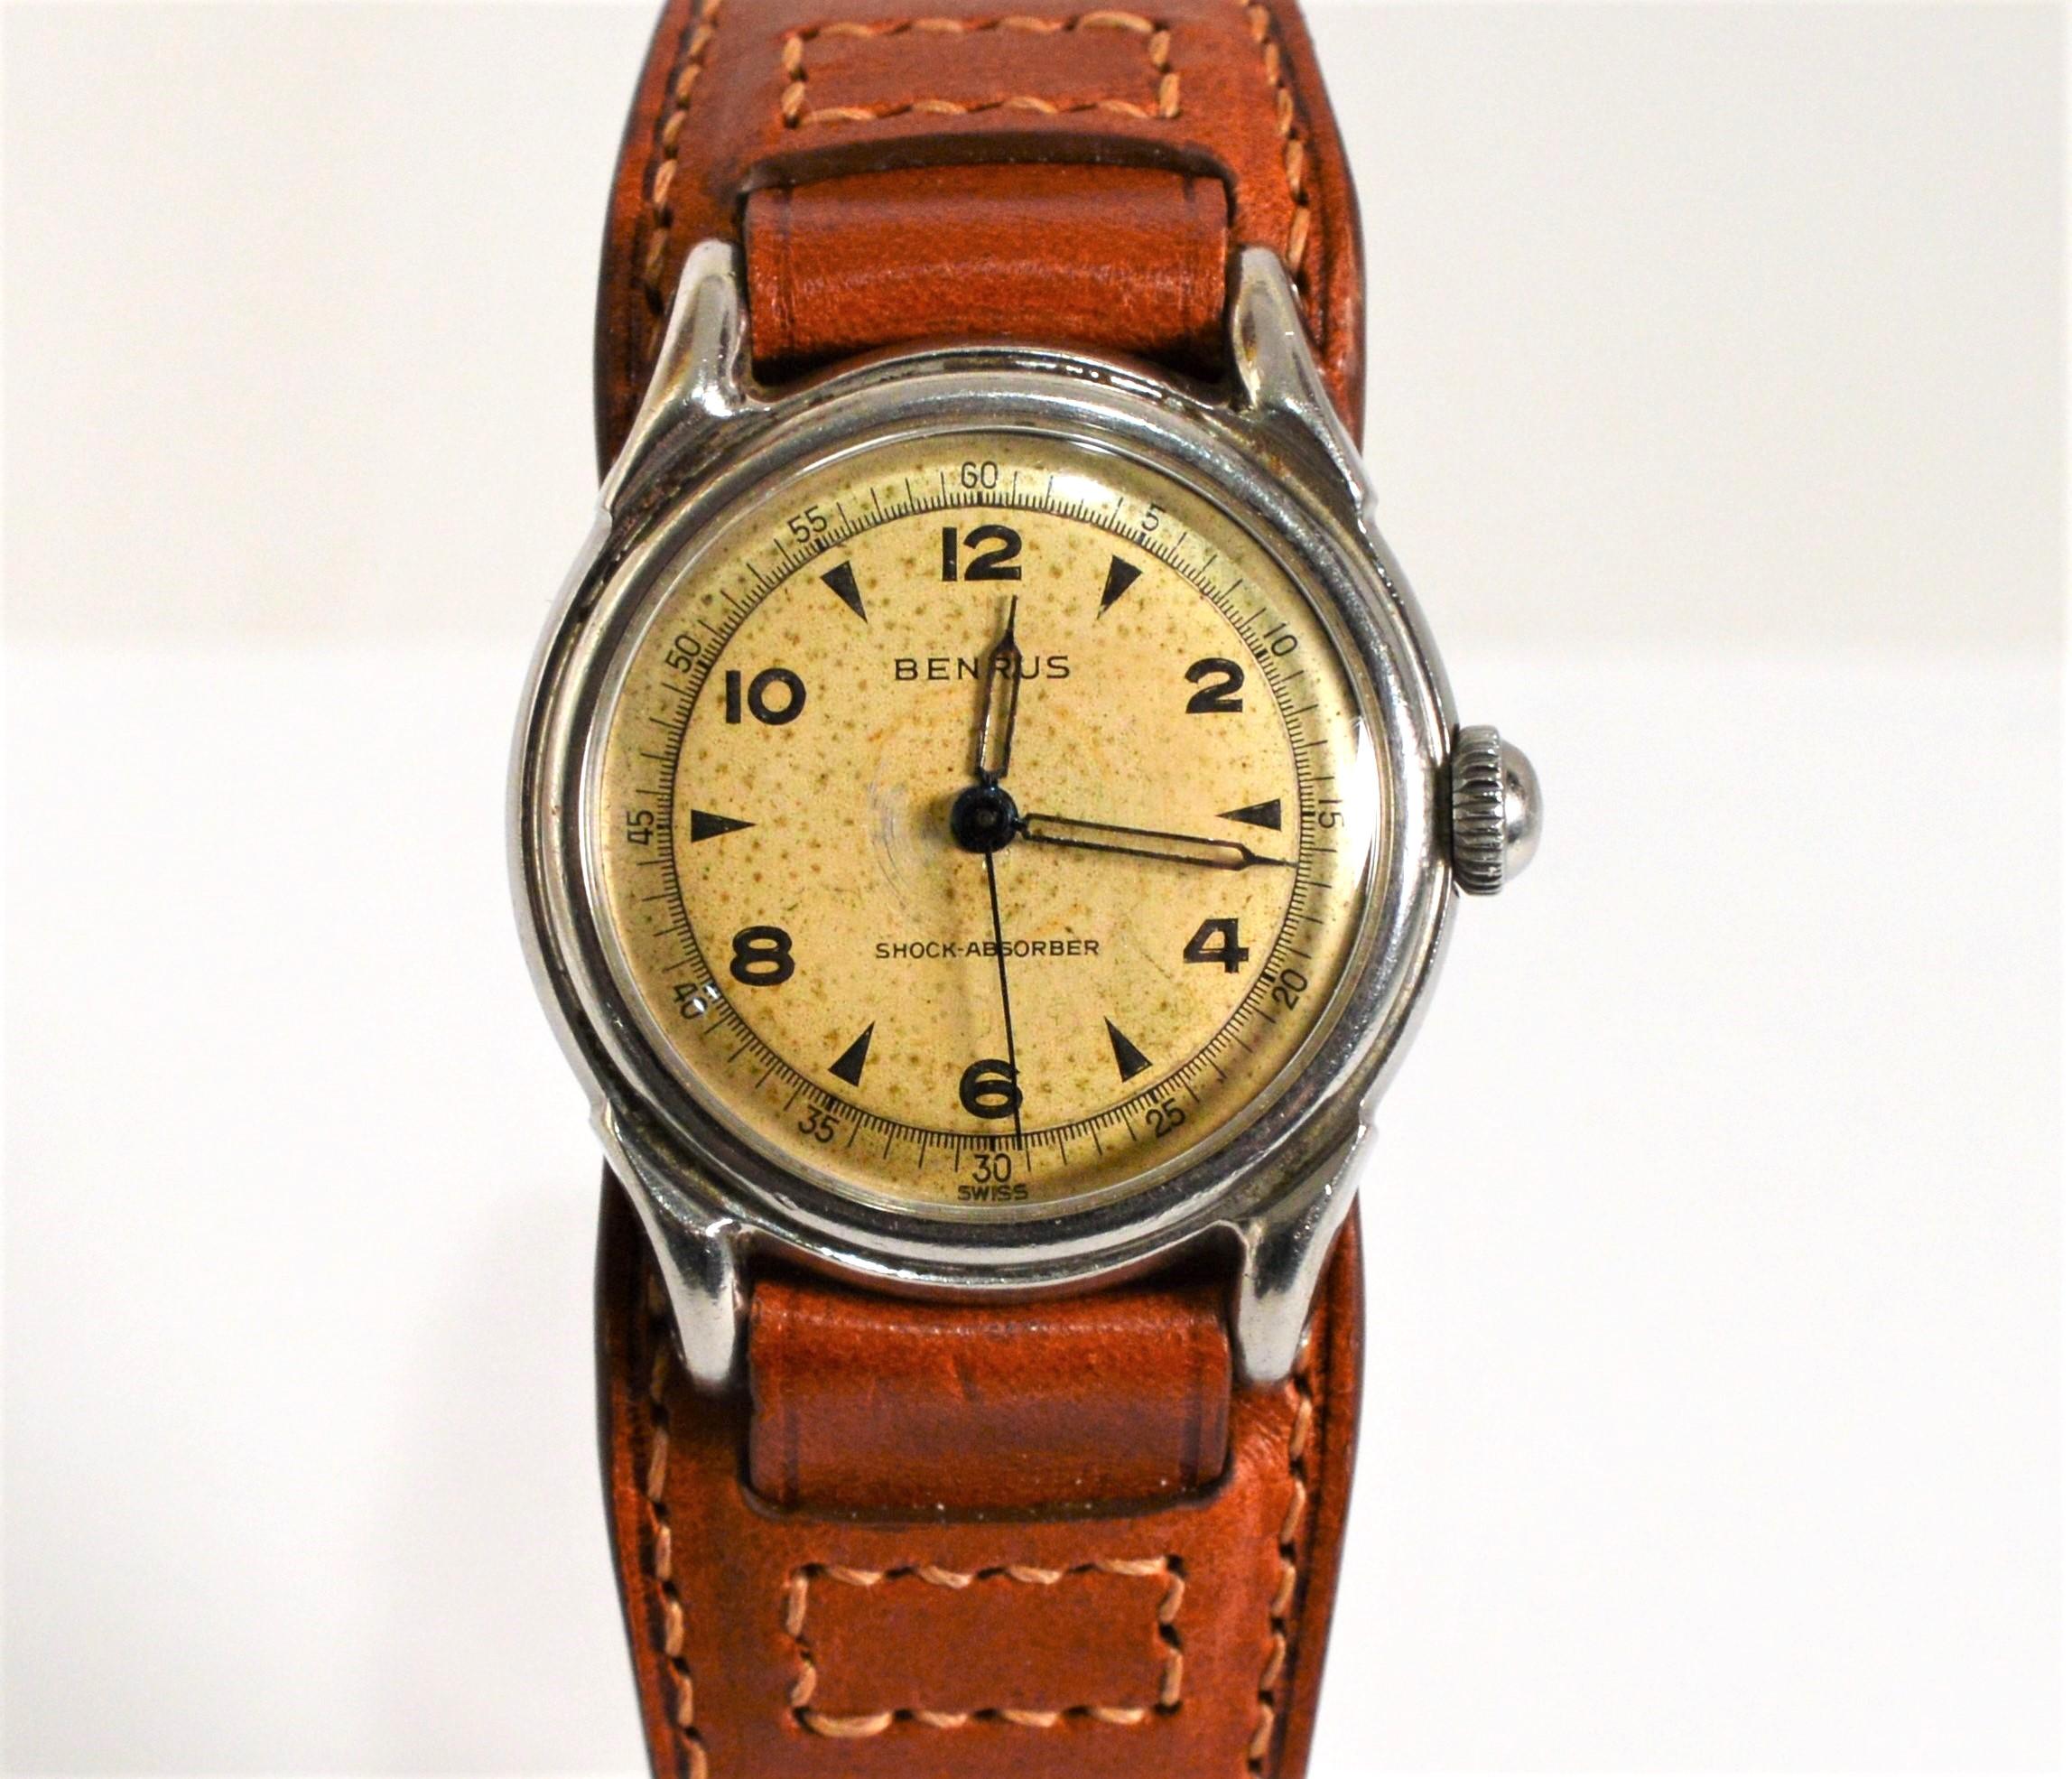 Enjoy this neat post WWII Benrus Military BH-11 Style Steel Men's Wrist Watch. In case size 31.5mm, the dial has a combination of Arabic numerals and matchstick markers with a sweep second hand.  The metallic blue hands and second hand add a bit of